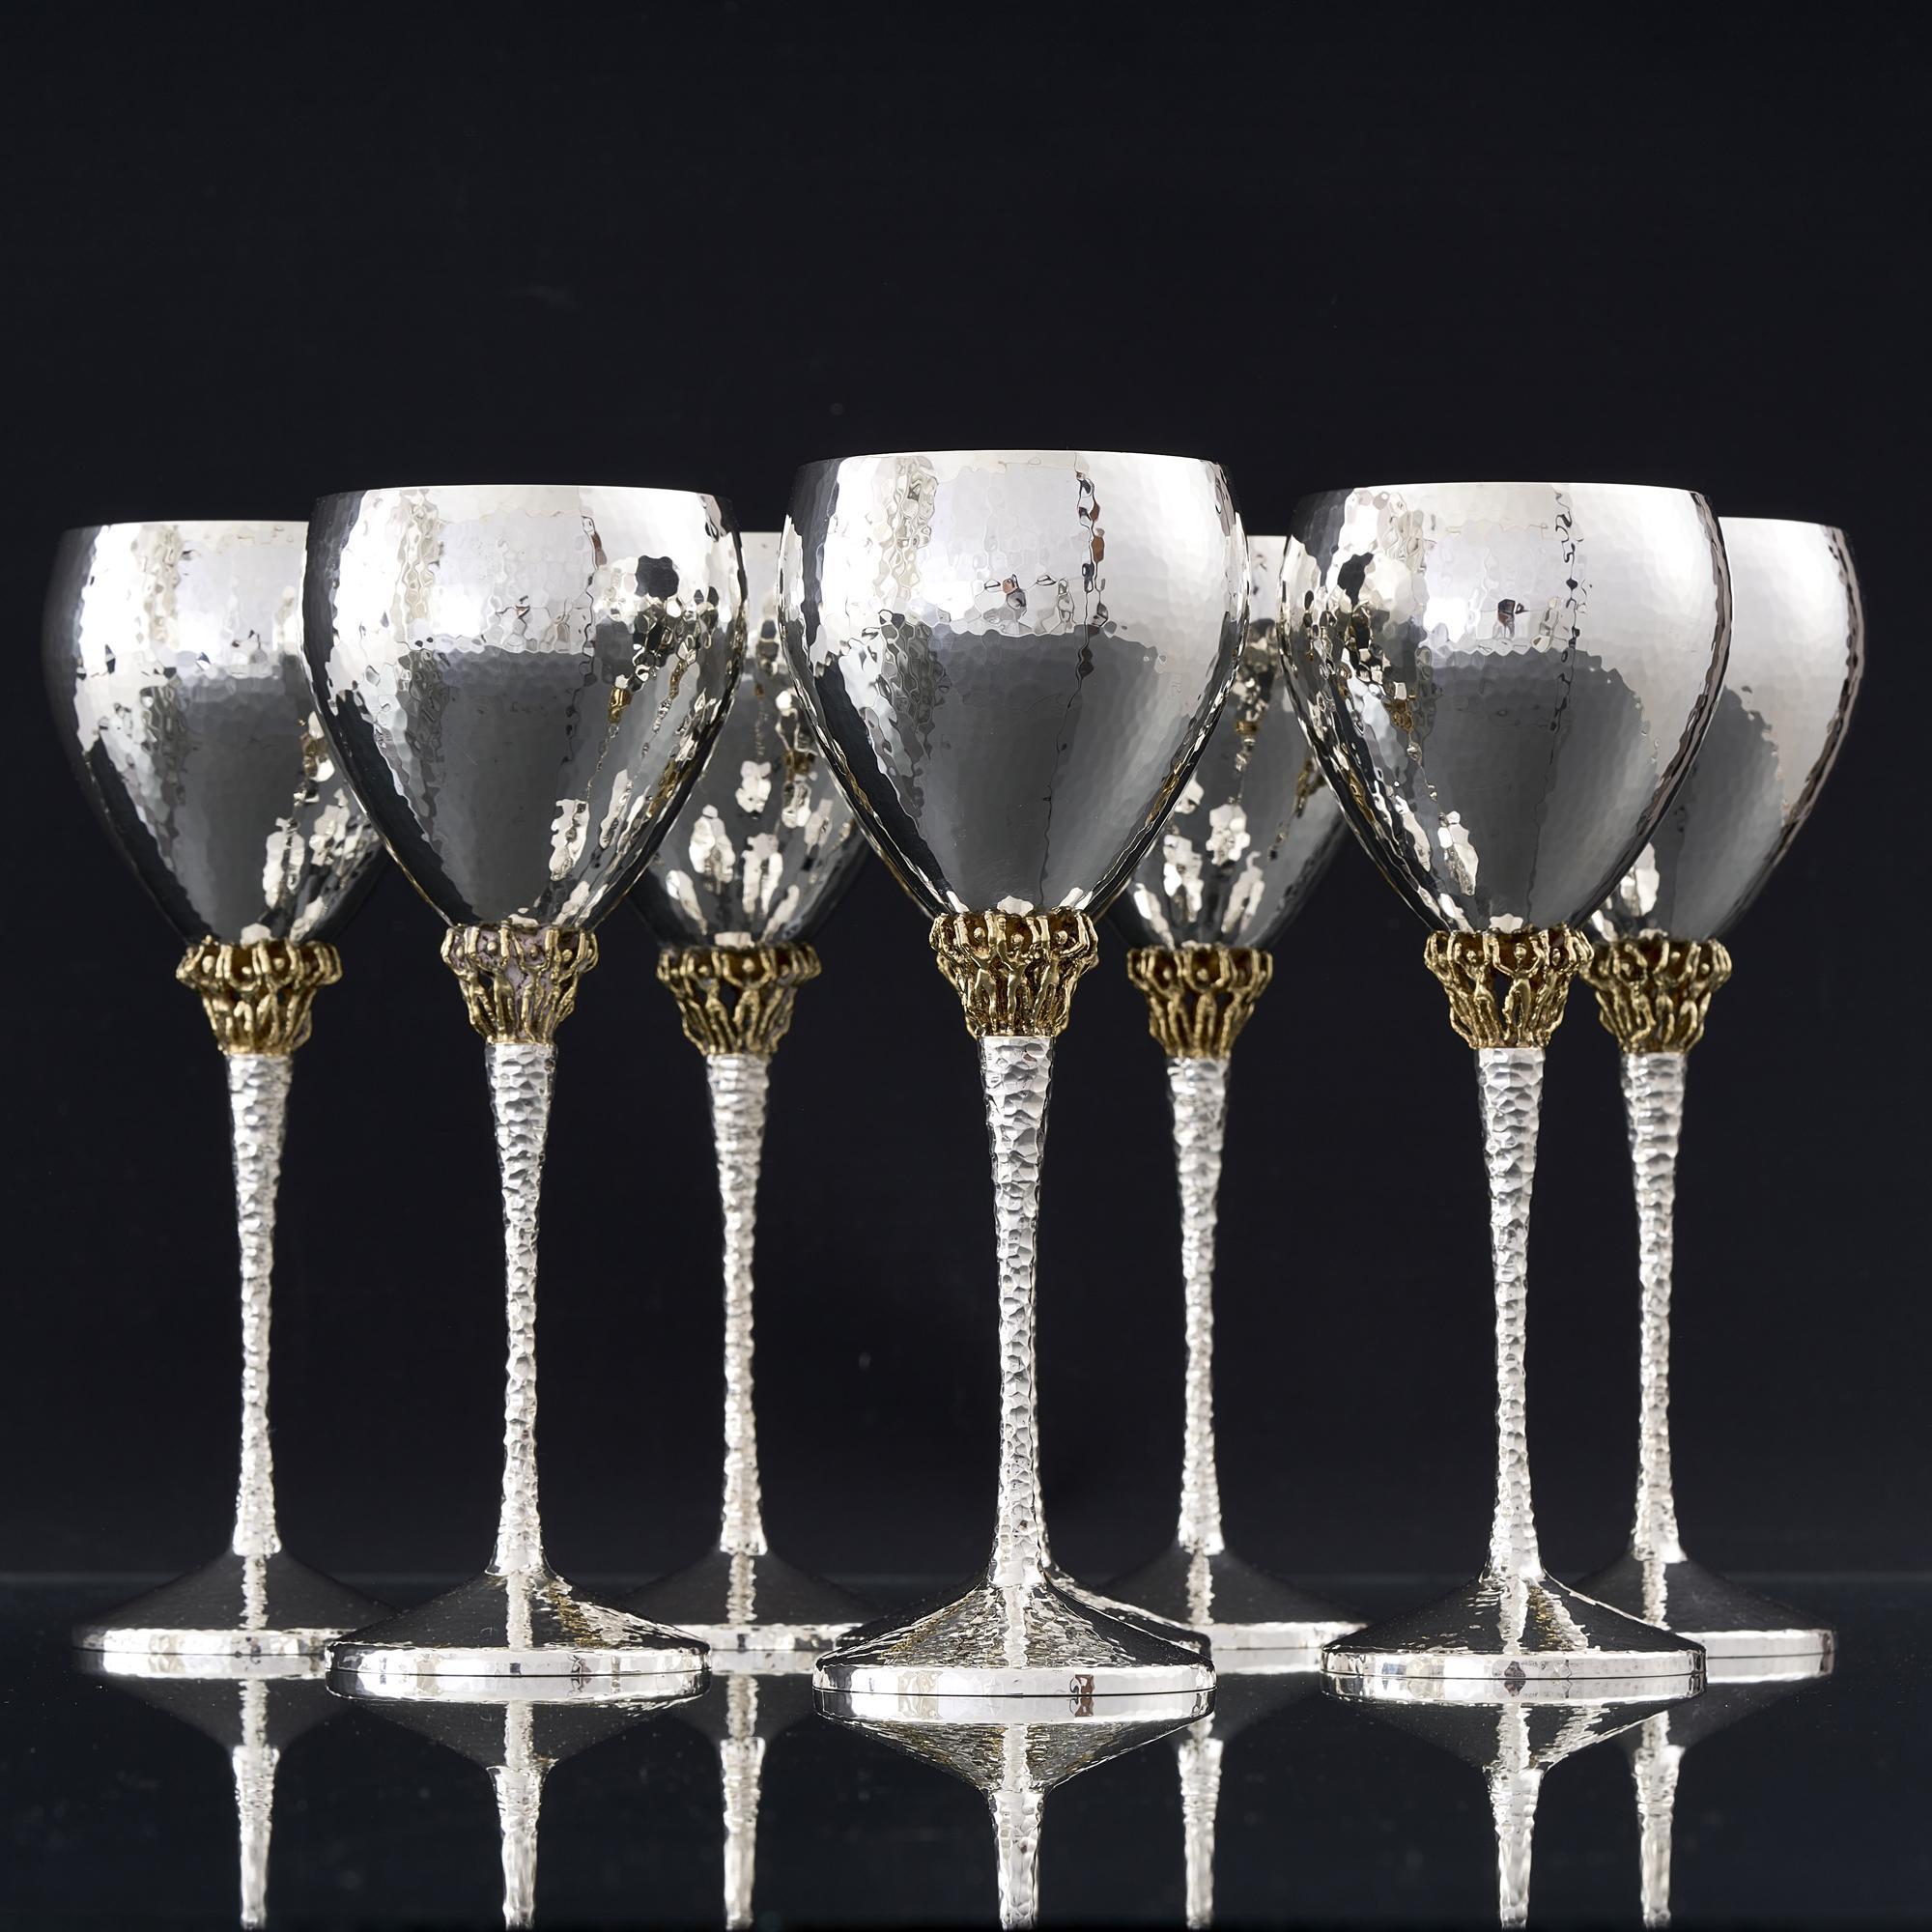 A set of eight mid-century silver wine goblets by one of the finest silversmiths of the 20th century, Stuart Devlin, and reflecting his very distinctive decorative style. The hand raised bowls and cast tapering stems are hand hammered and